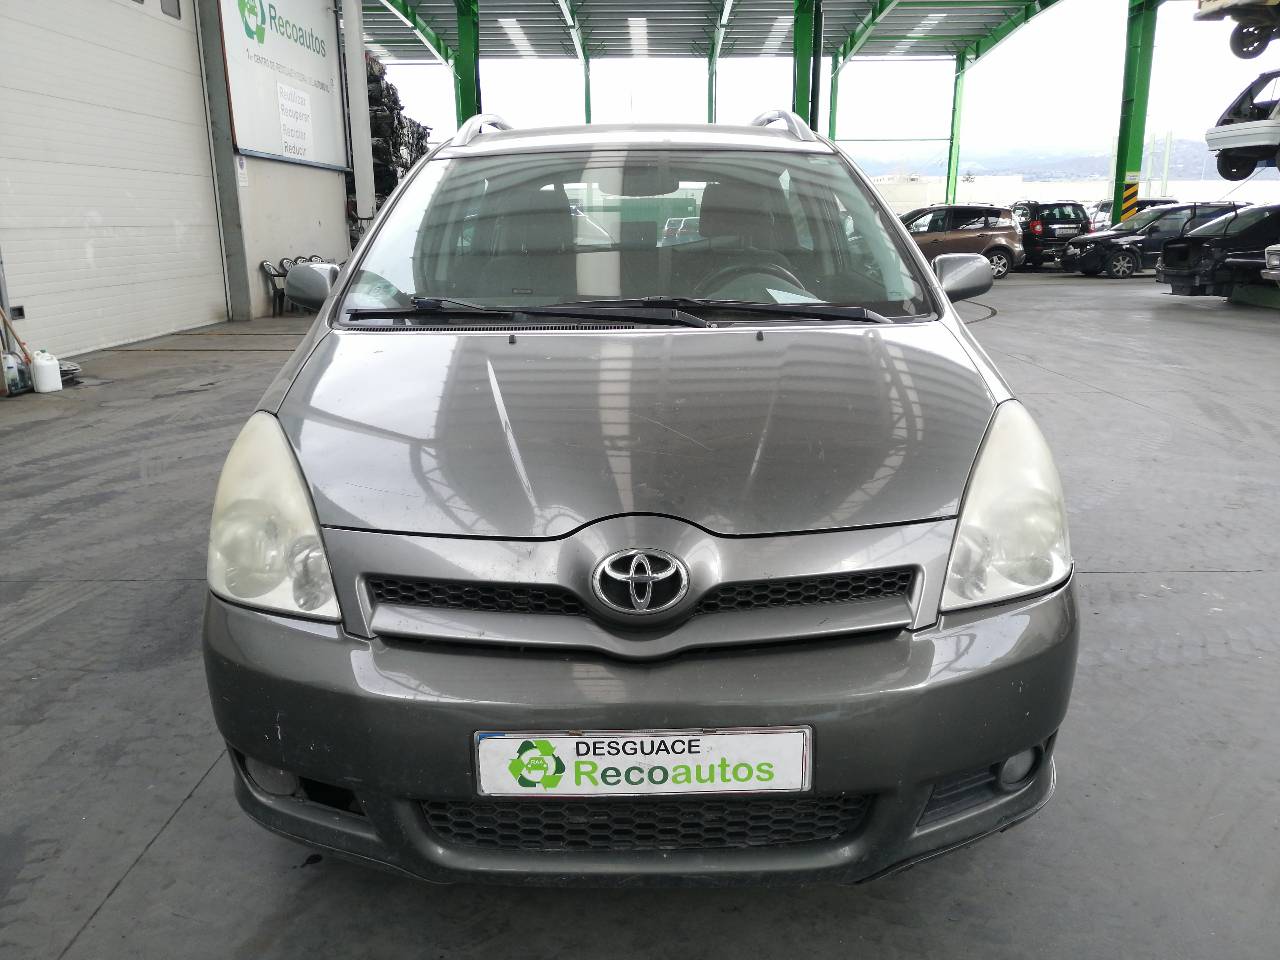 TOYOTA Corolla Verso 1 generation (2001-2009) Other Body Parts 8928152021, 1983003041 24222884